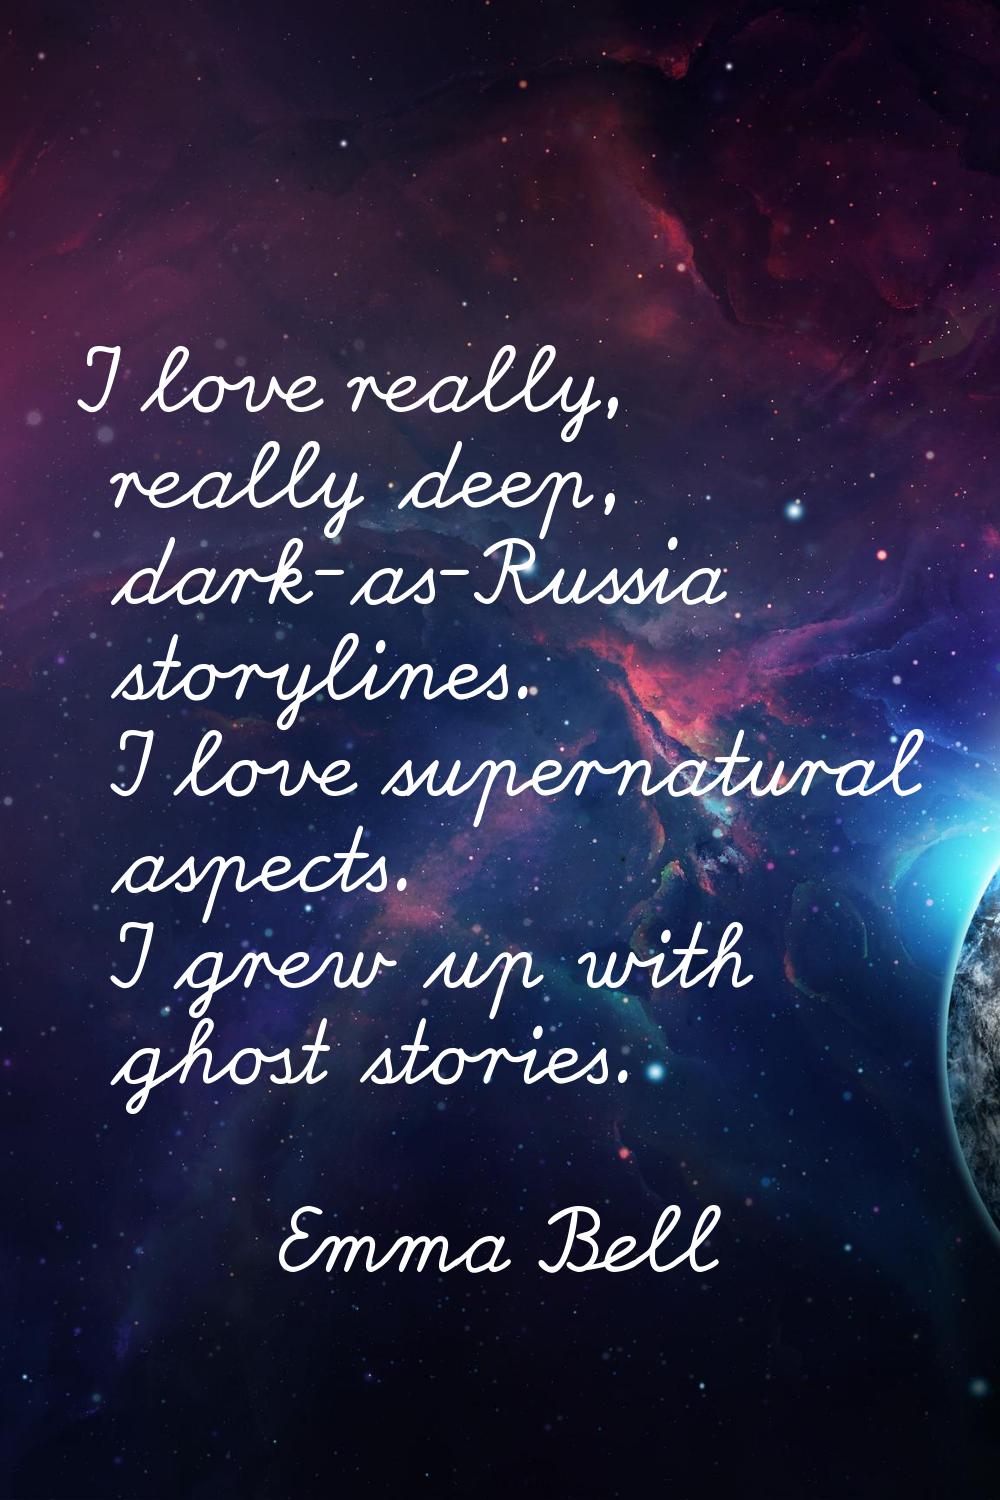 I love really, really deep, dark-as-Russia storylines. I love supernatural aspects. I grew up with 